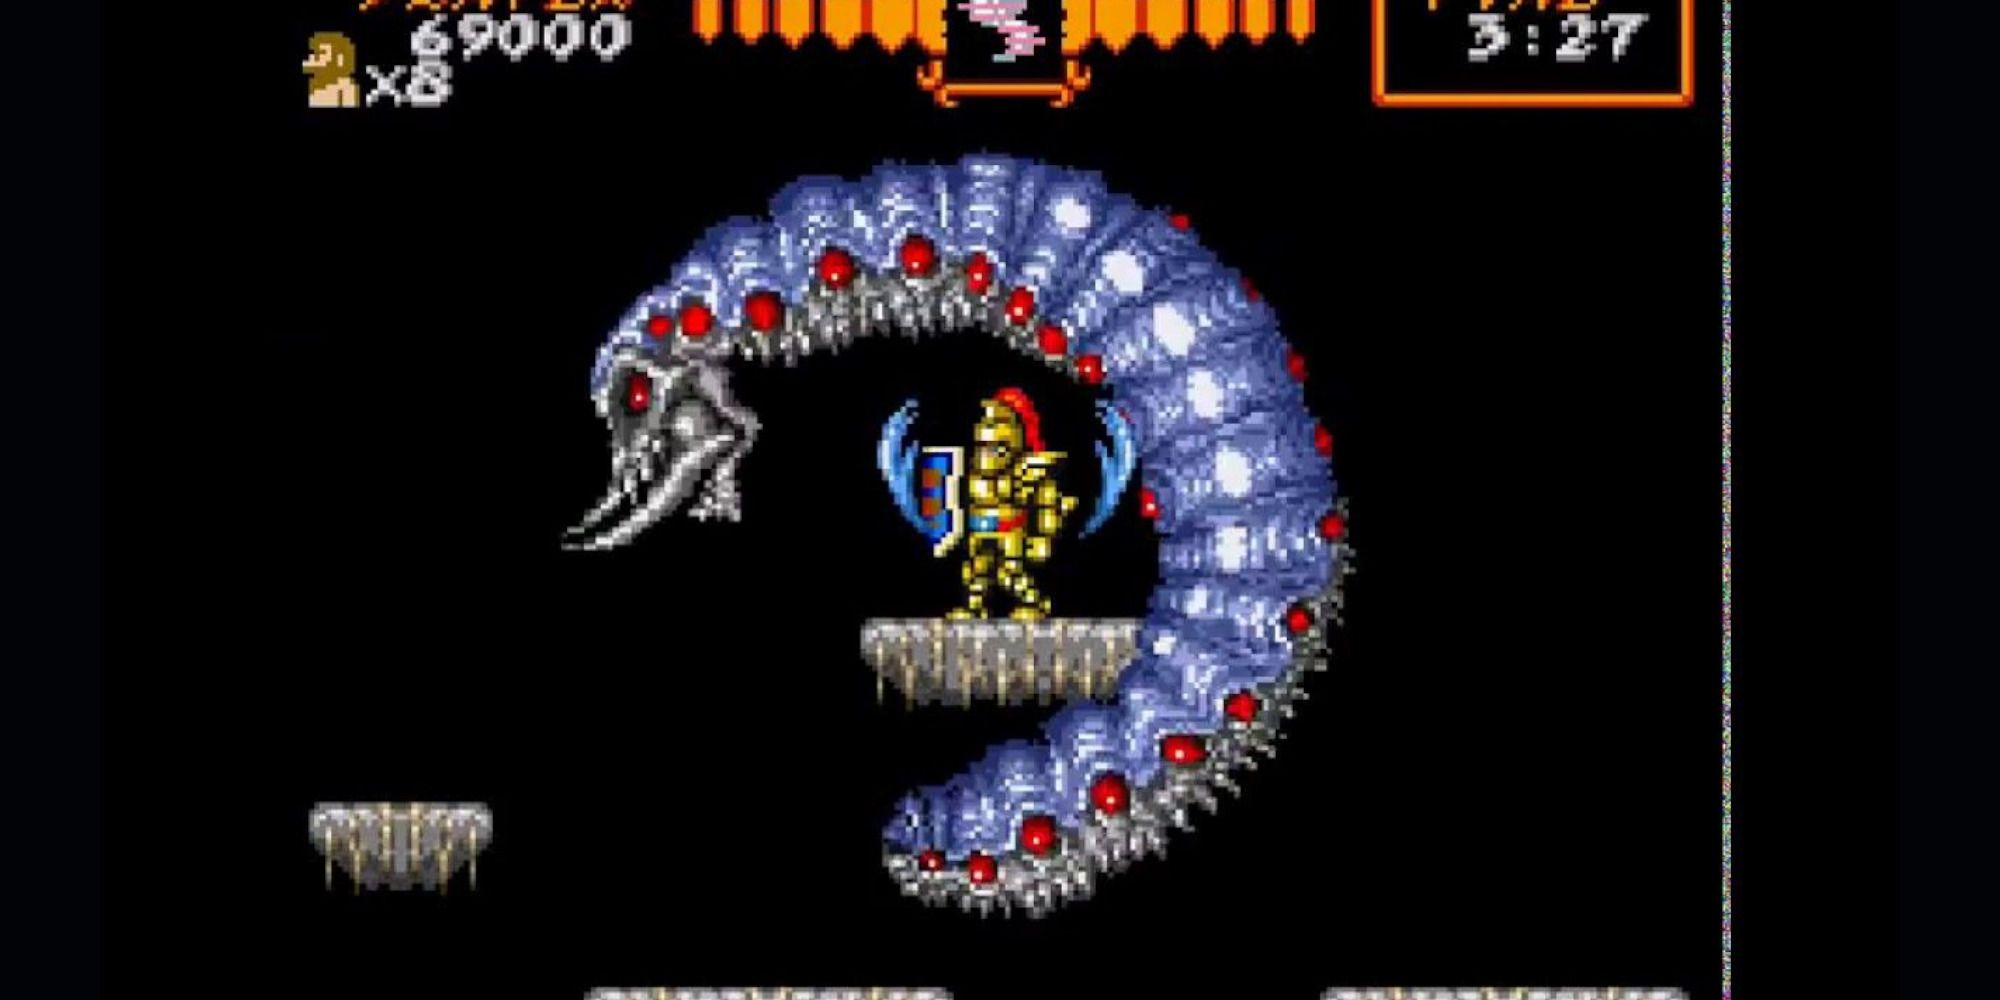 a player fighting a giant flying centipede boss in Super Ghouls n' Goblins